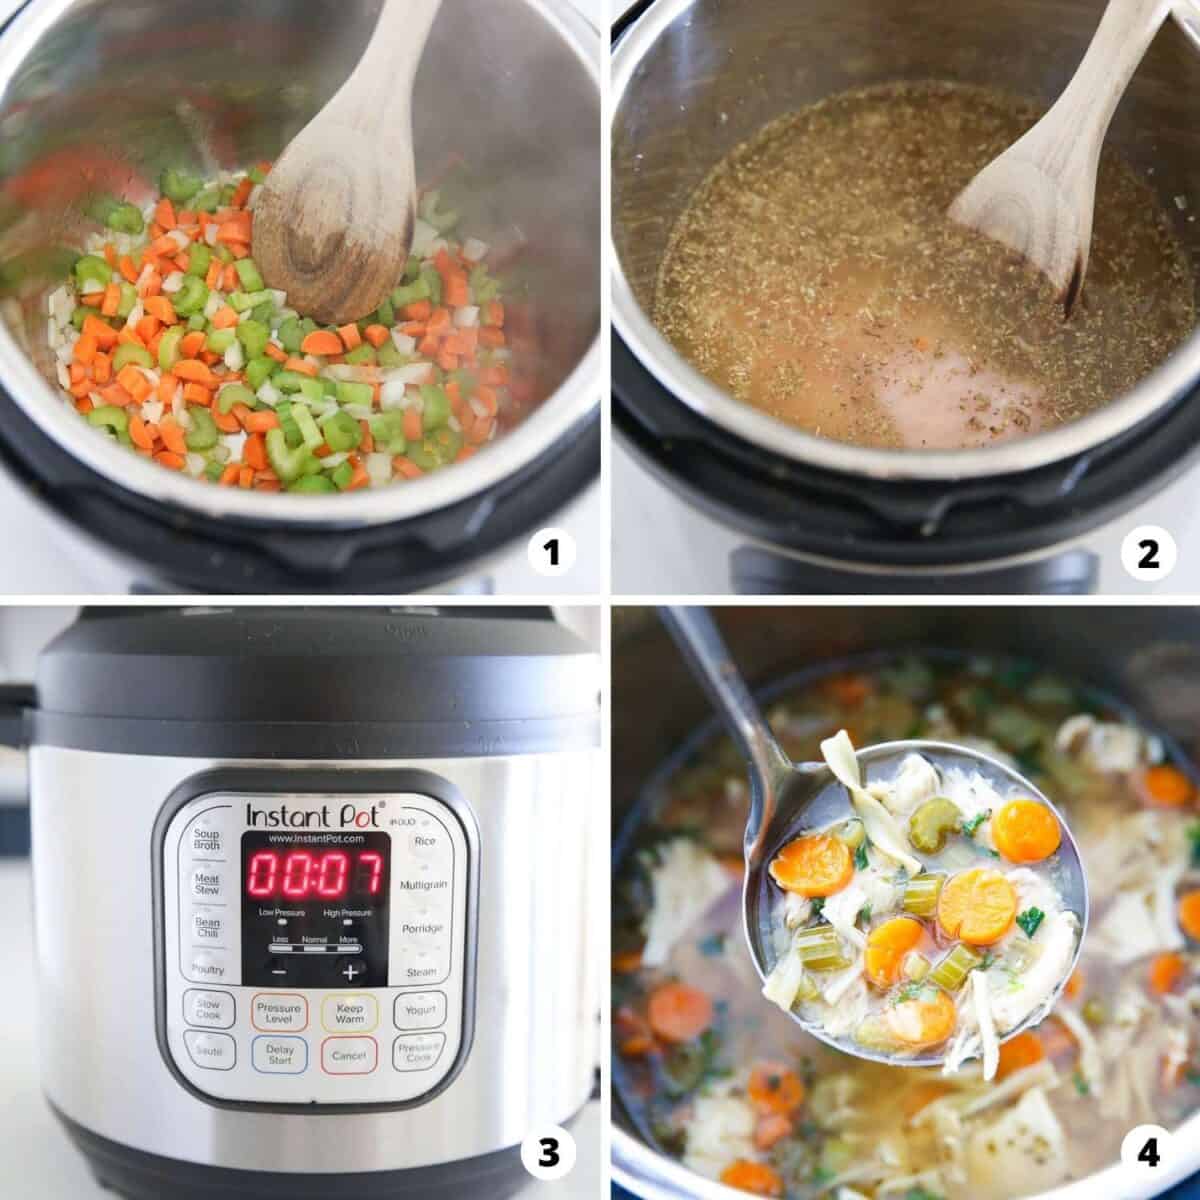 Showing how to make instant pot chicken noodle soup in a 4 step collage.